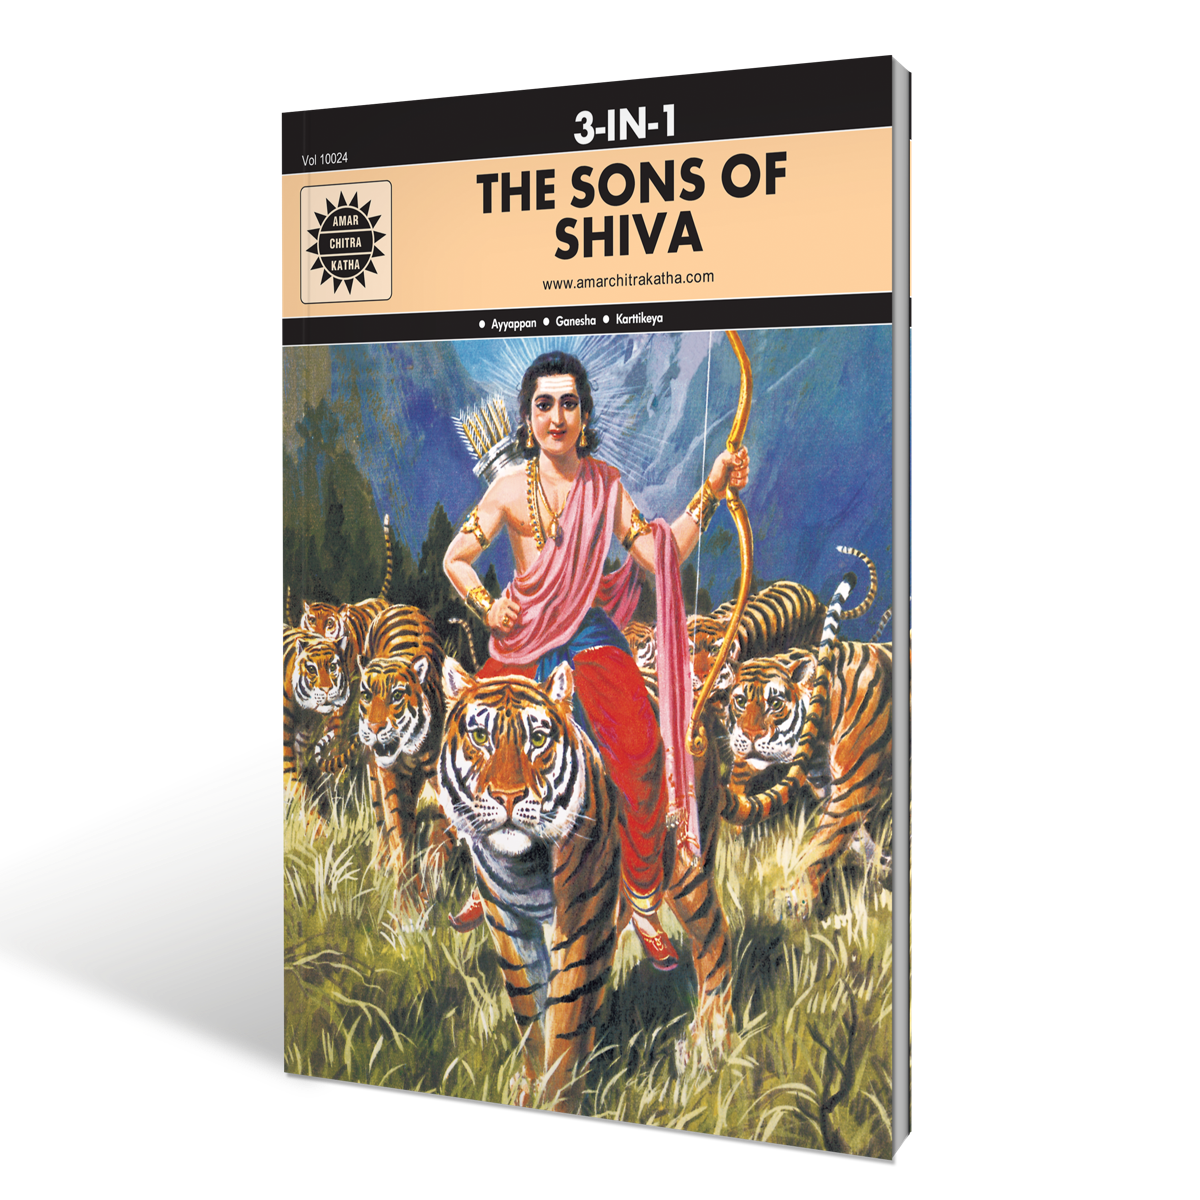 The Sons of Shiva: 3-in-1